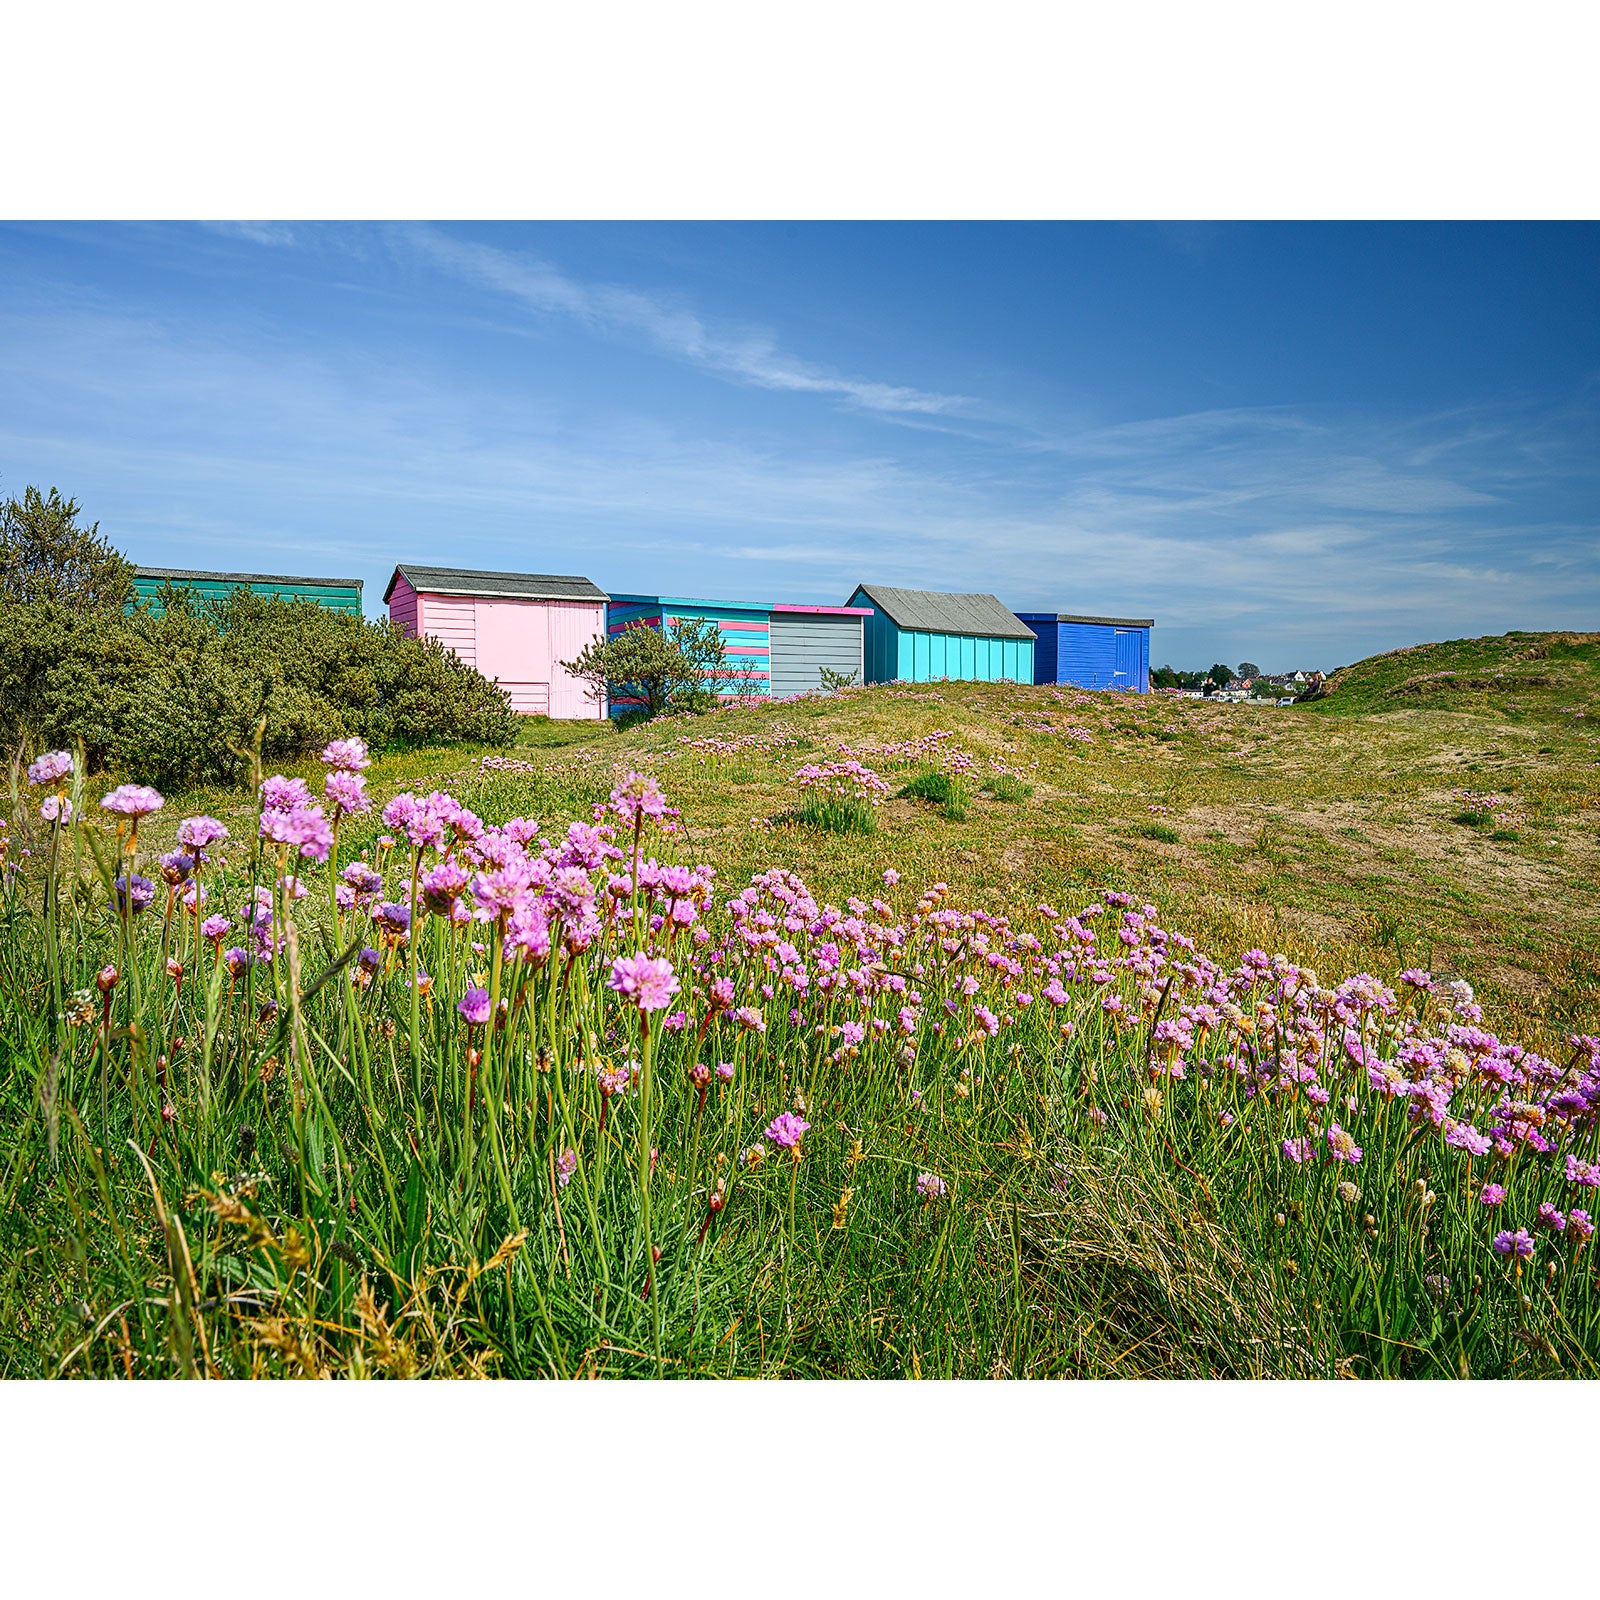 Colorful beach huts behind a field of pink wildflowers on The Duver, St. Helens under a clear blue sky captured by Available Light Photography.